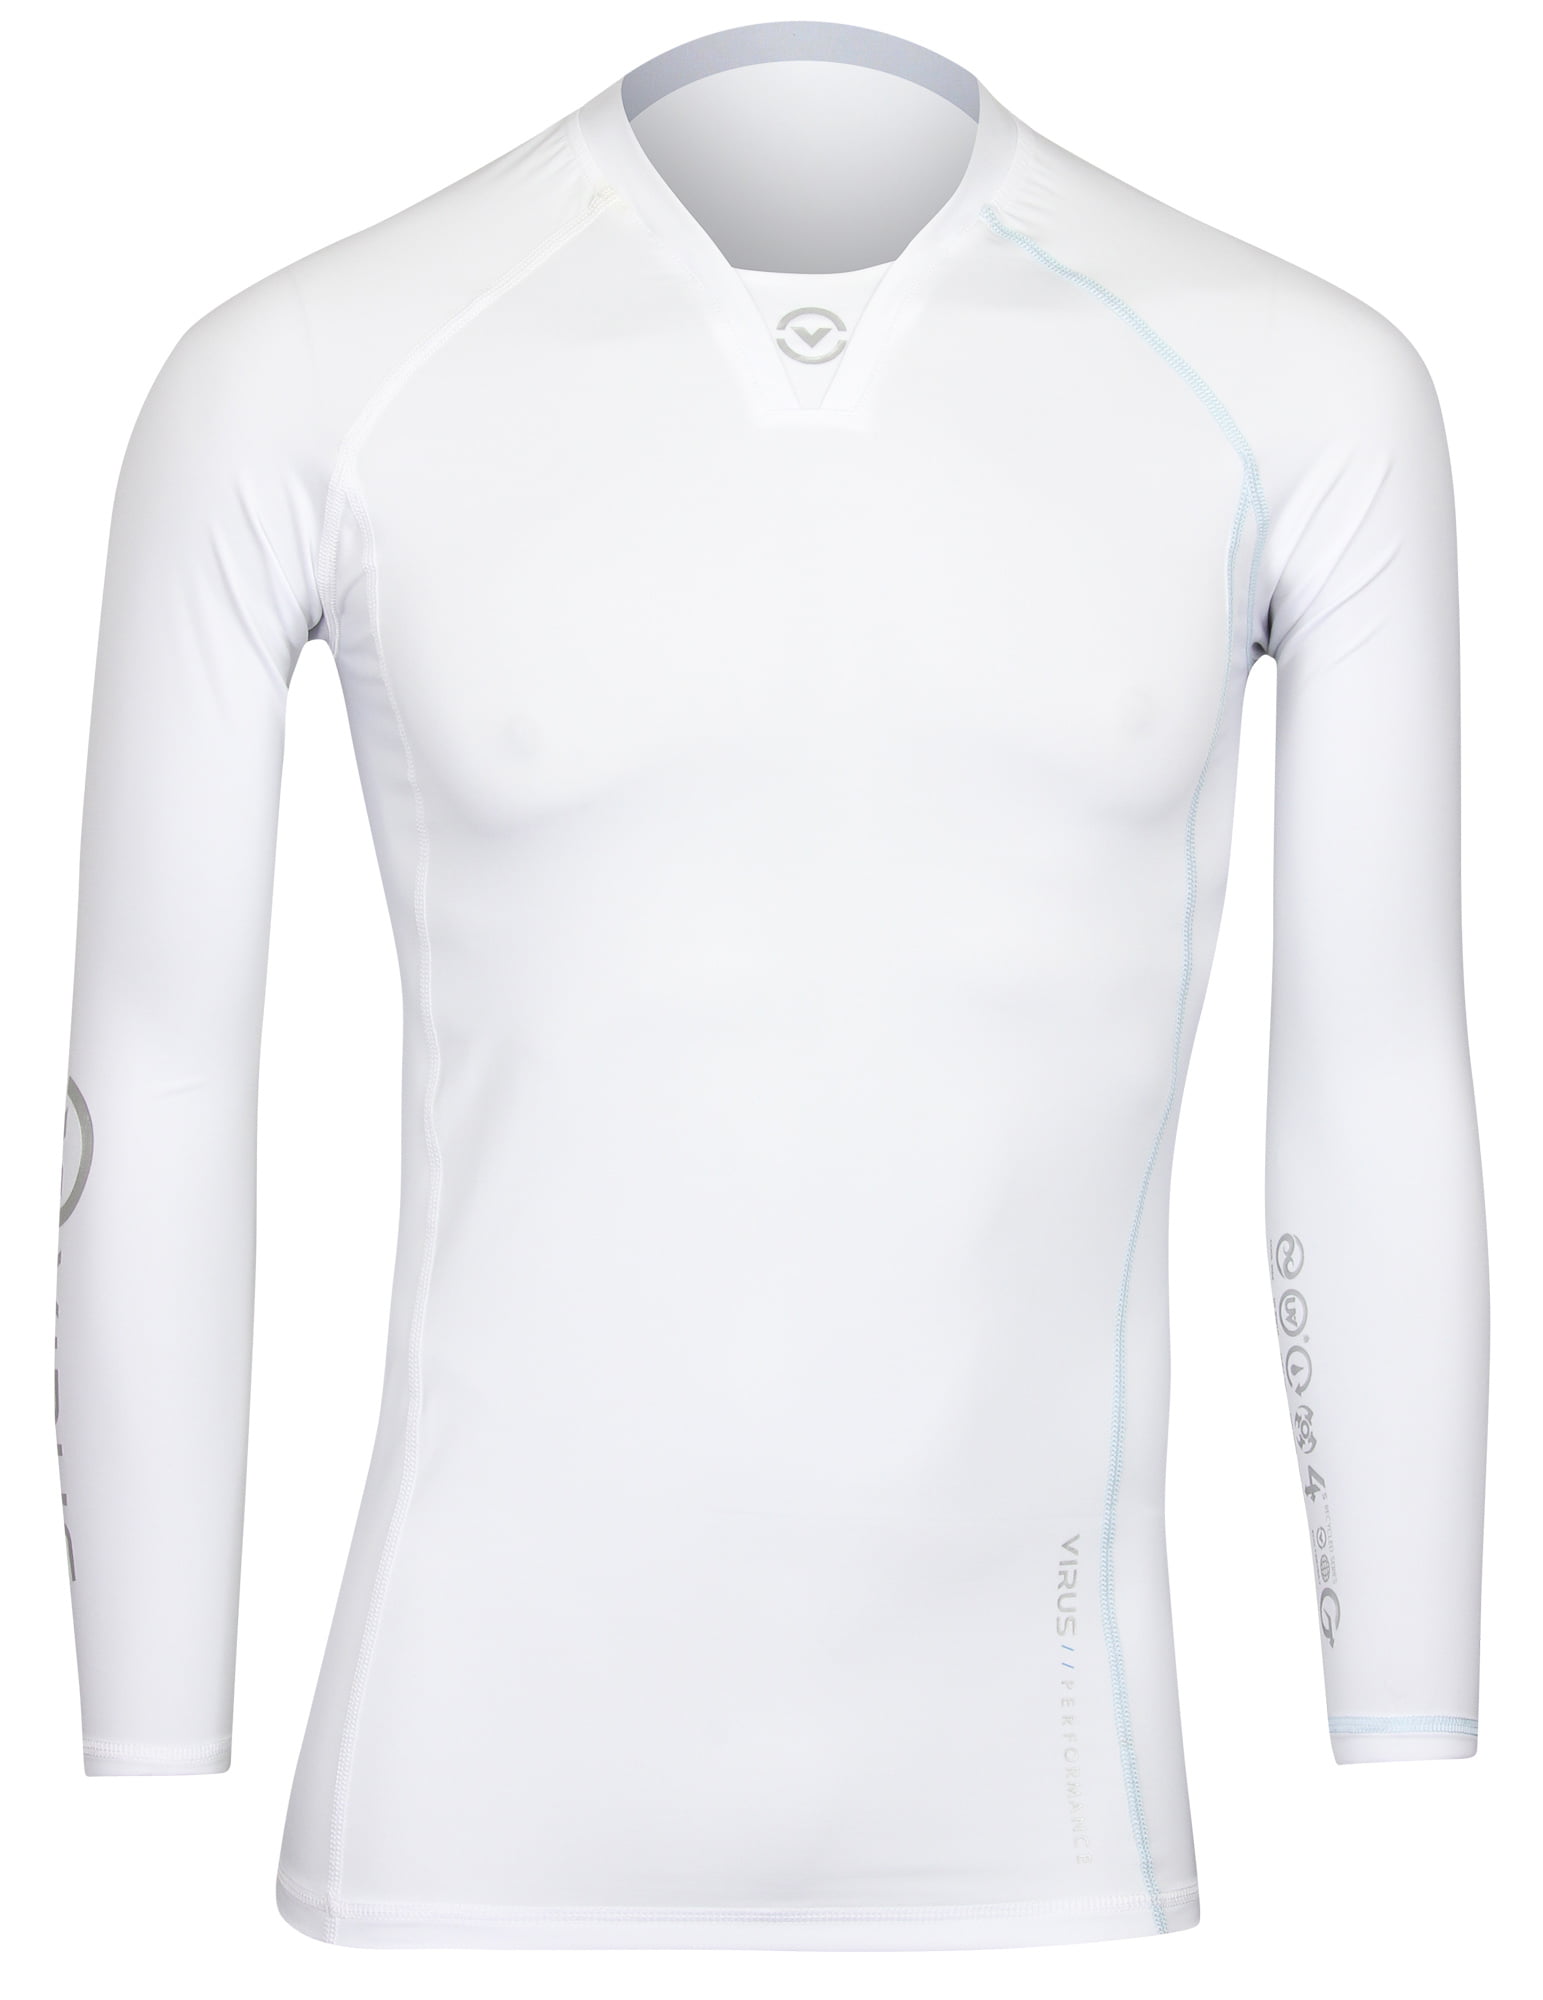 White VIRUS Men's Stay Cool Short Sleeve Cool Jade Compression Top 